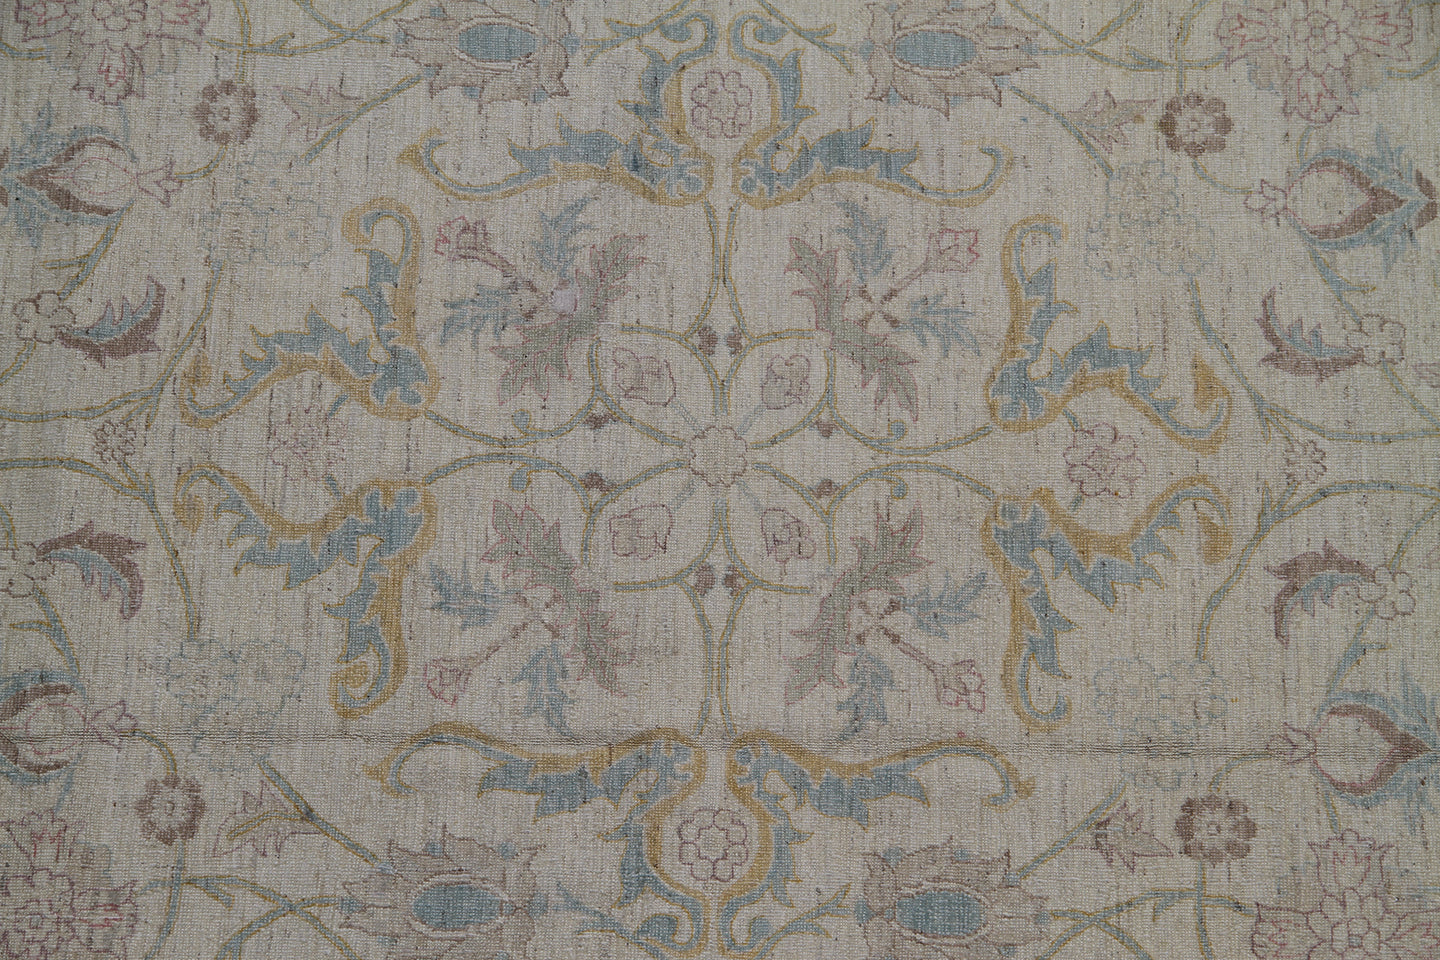 8'x10' Polonaise Design Ariana Luxury Hand-Knotted Silk and Wool Area Rug